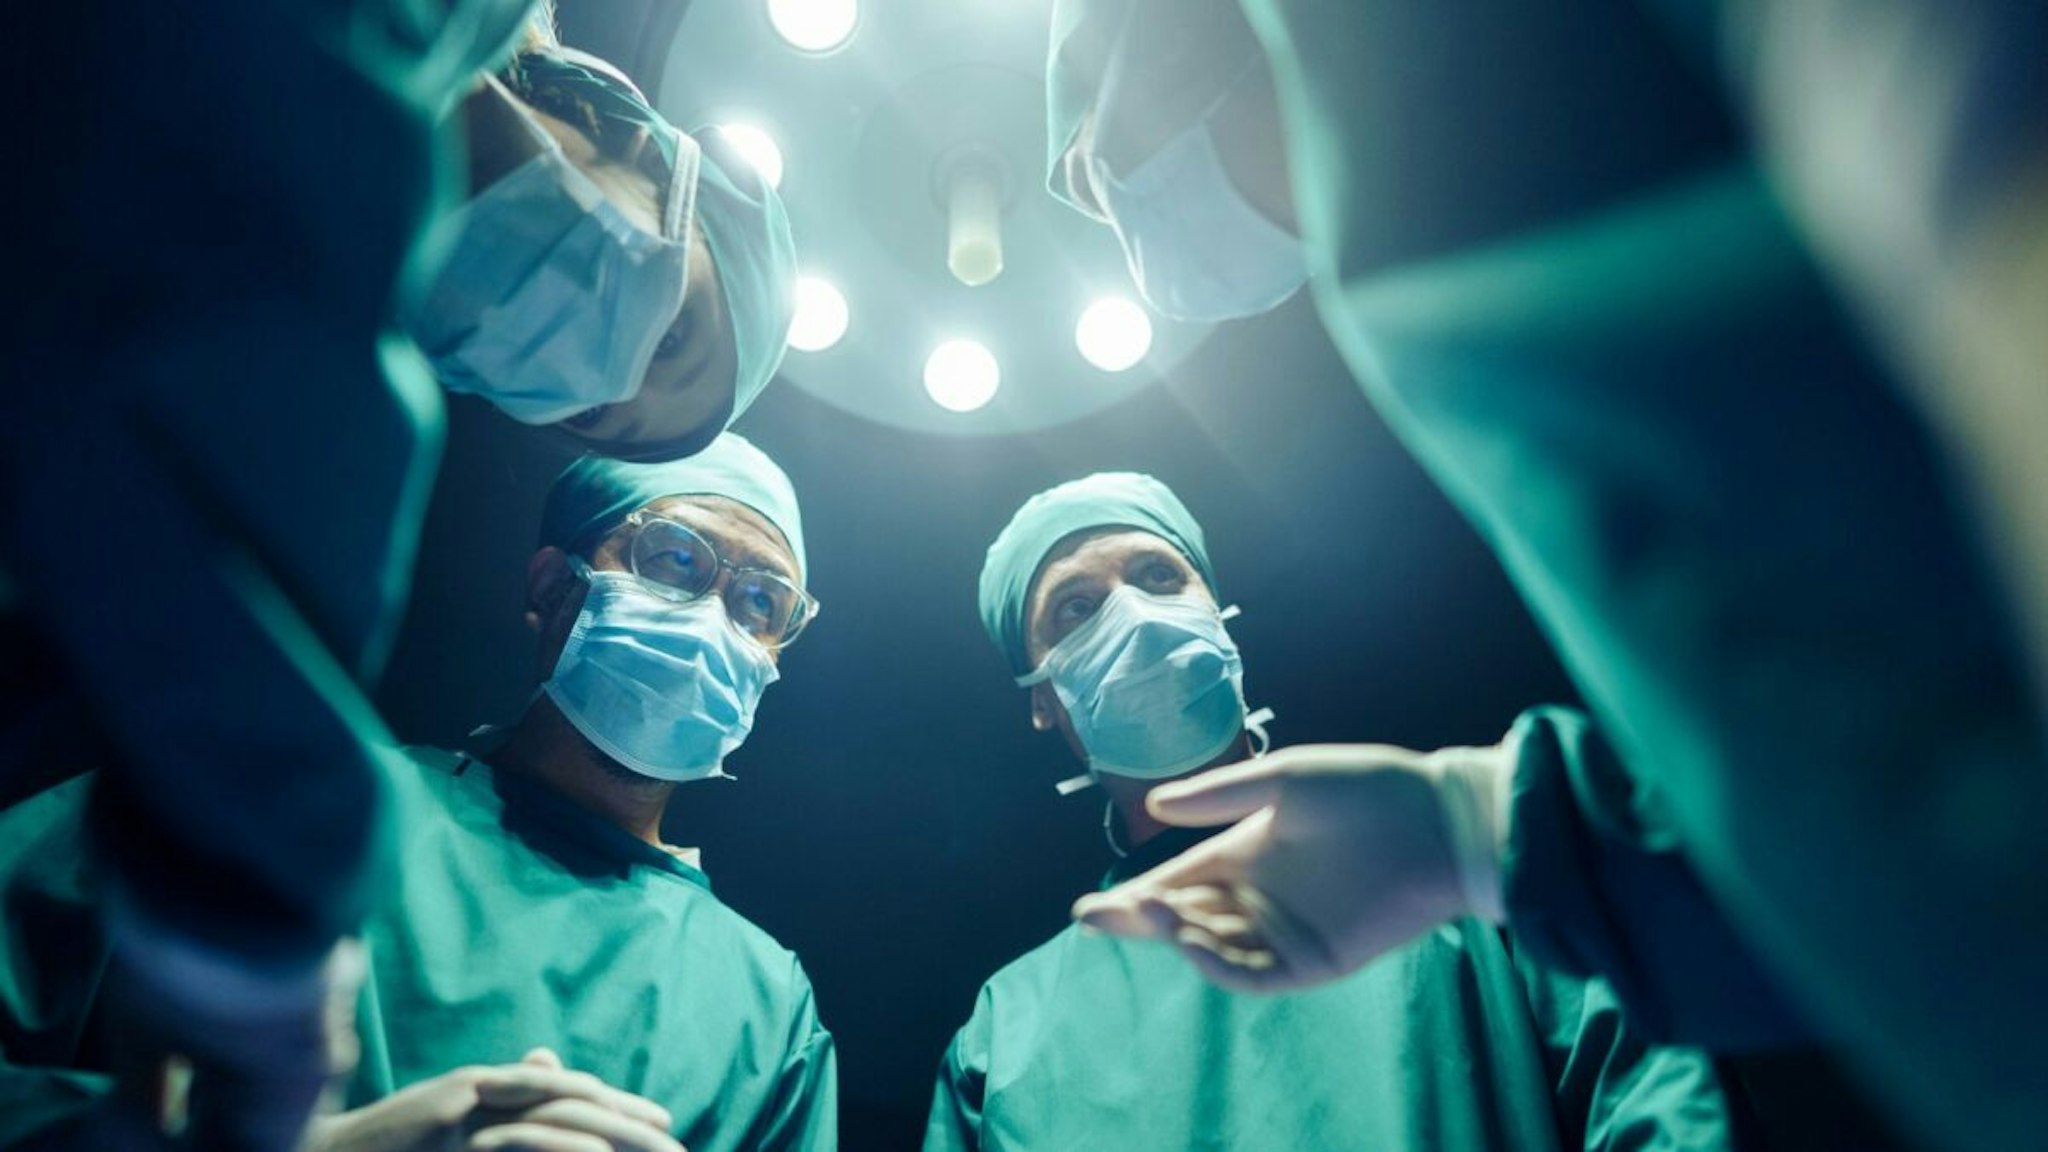 Low angle Four Surgeons coordinating their operating cases While in the operating room, teamwork and Cooperation - stock photo